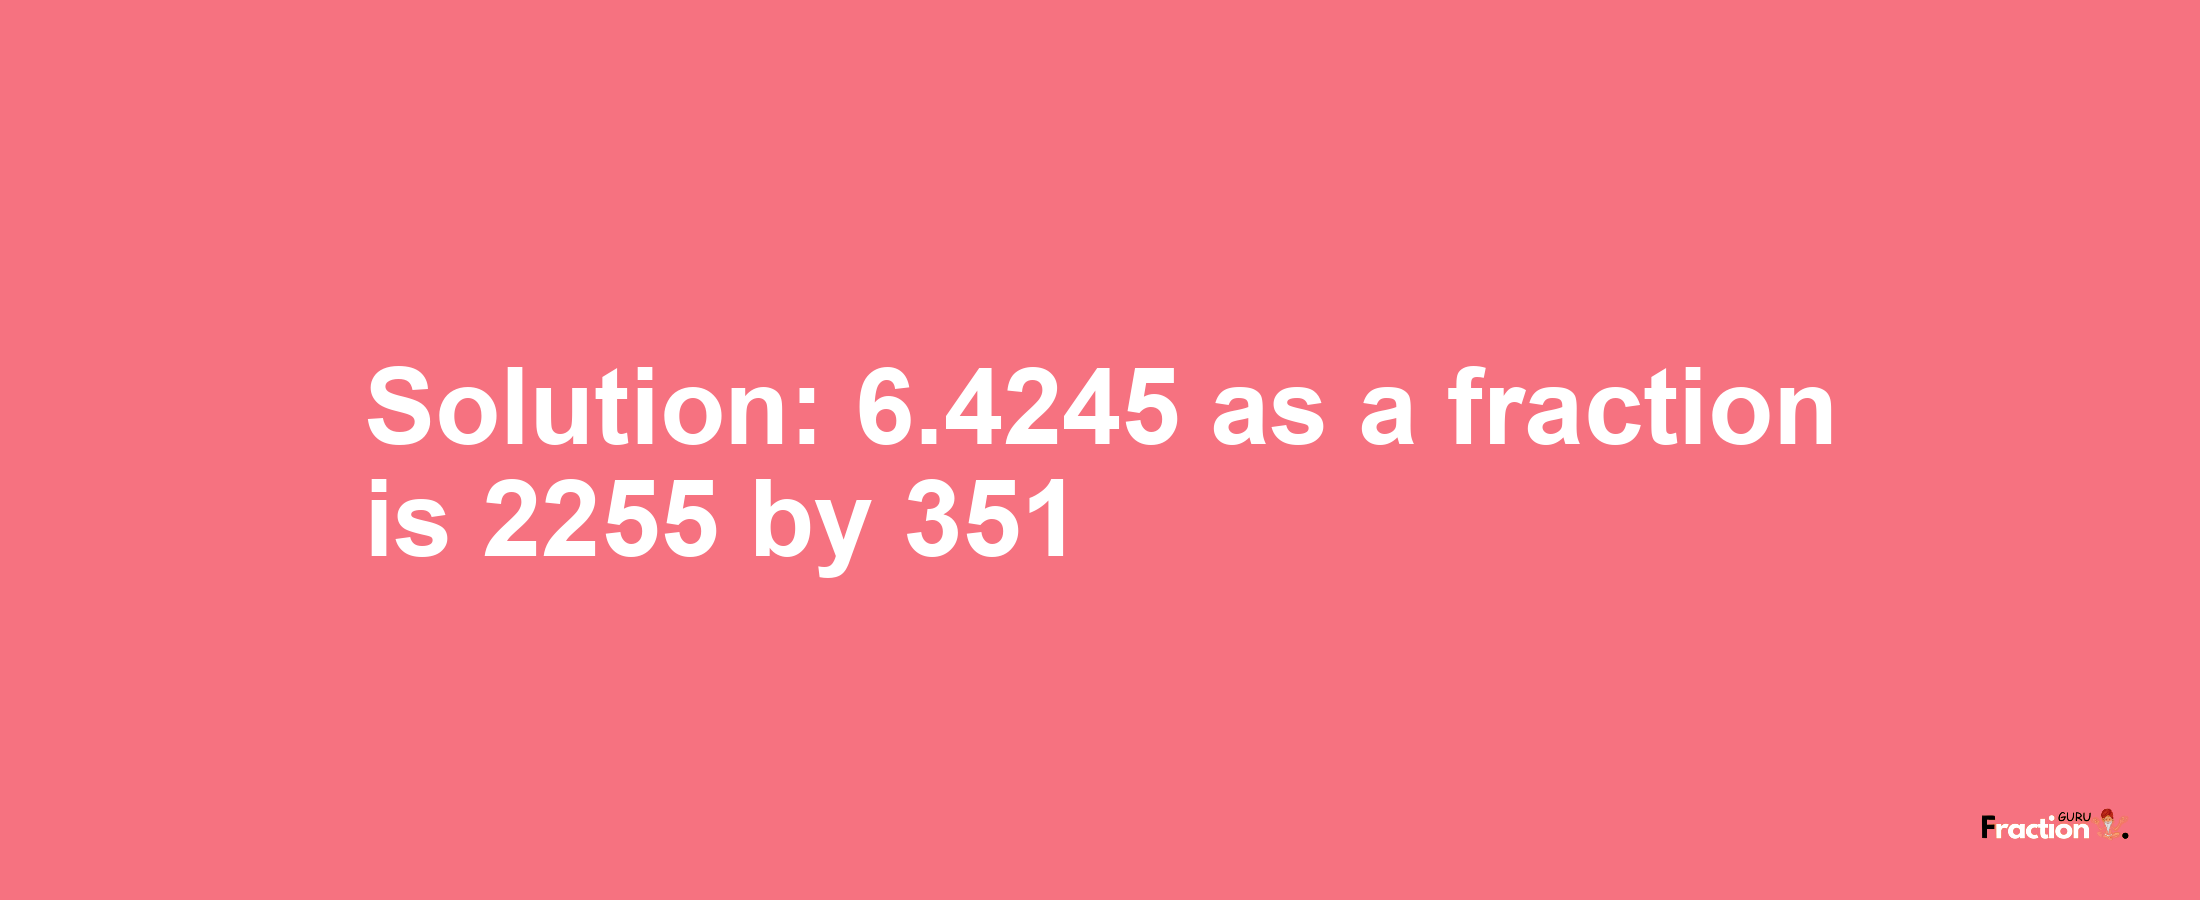 Solution:6.4245 as a fraction is 2255/351